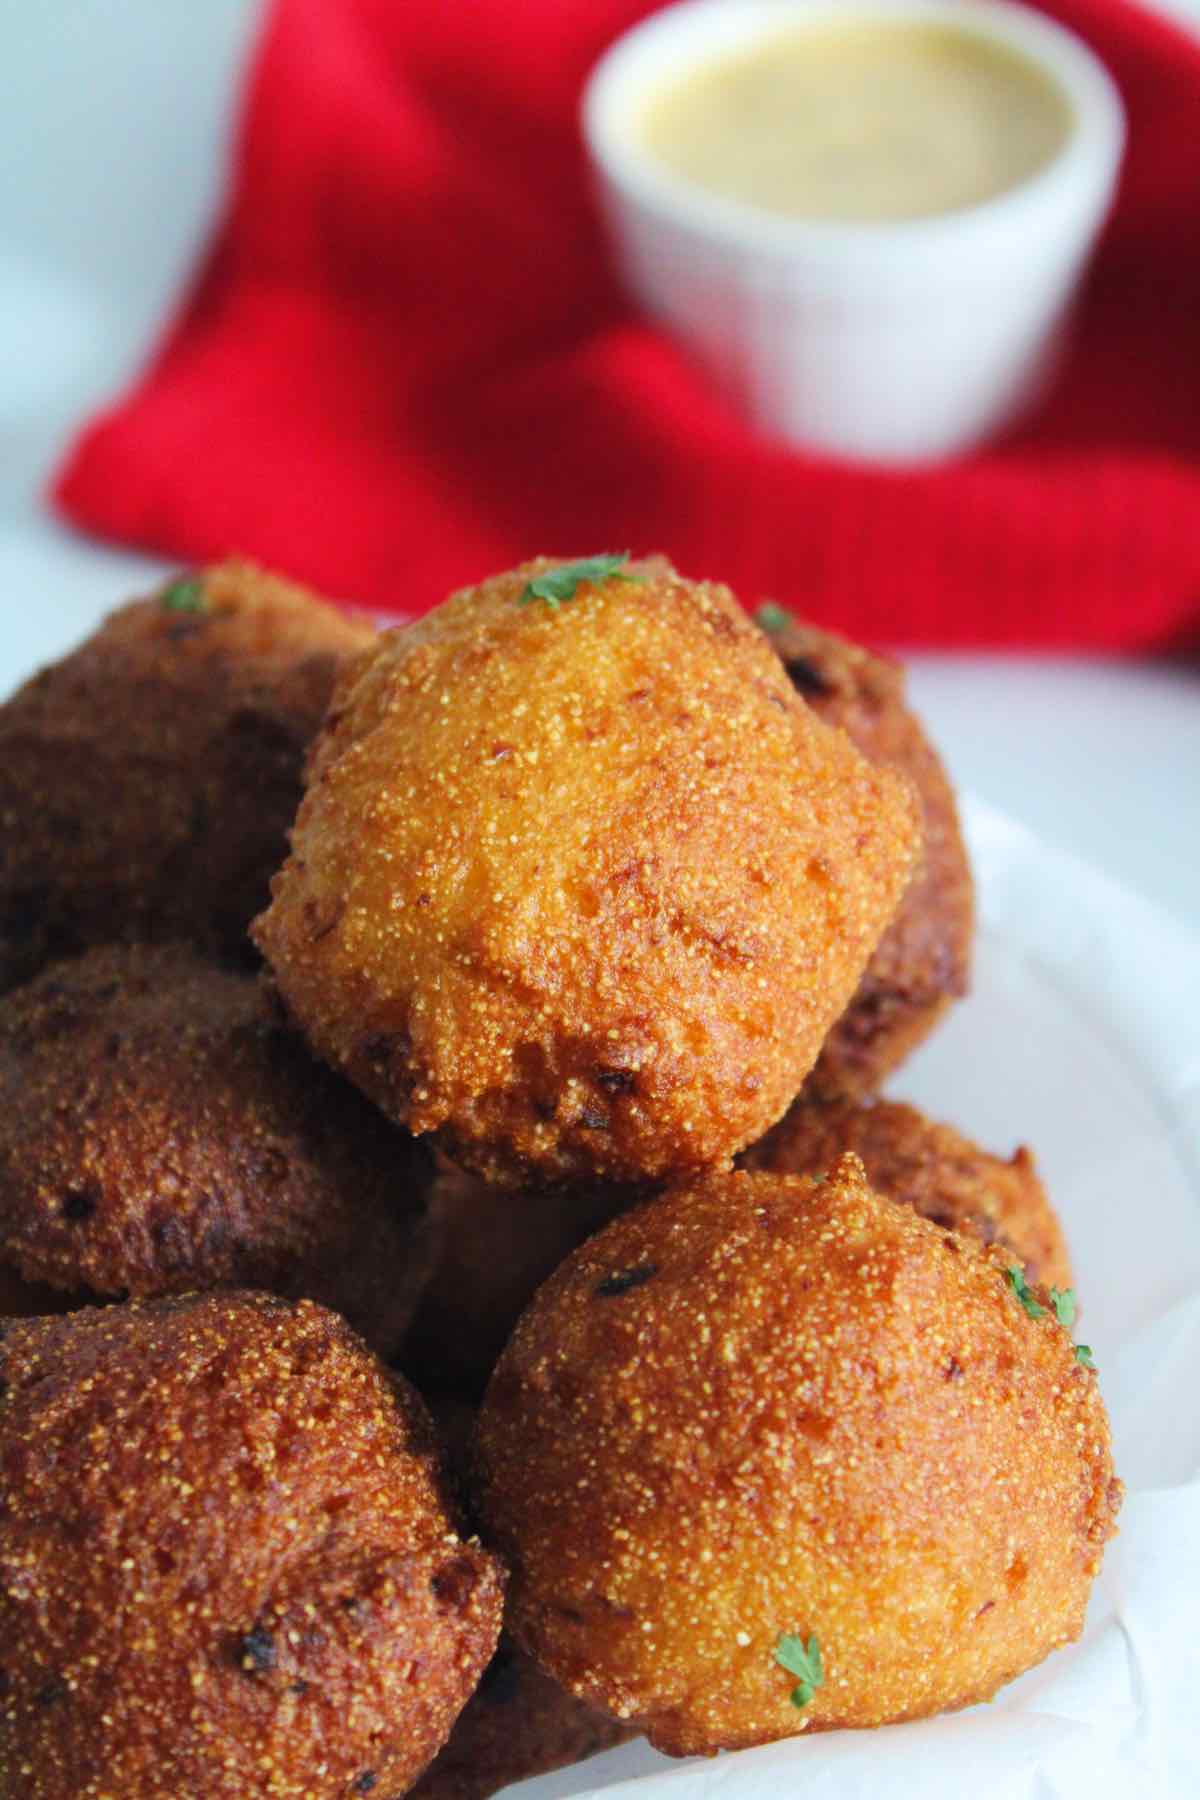 Deep fried cajun hush puppies make the perfect appetizer or side dish.